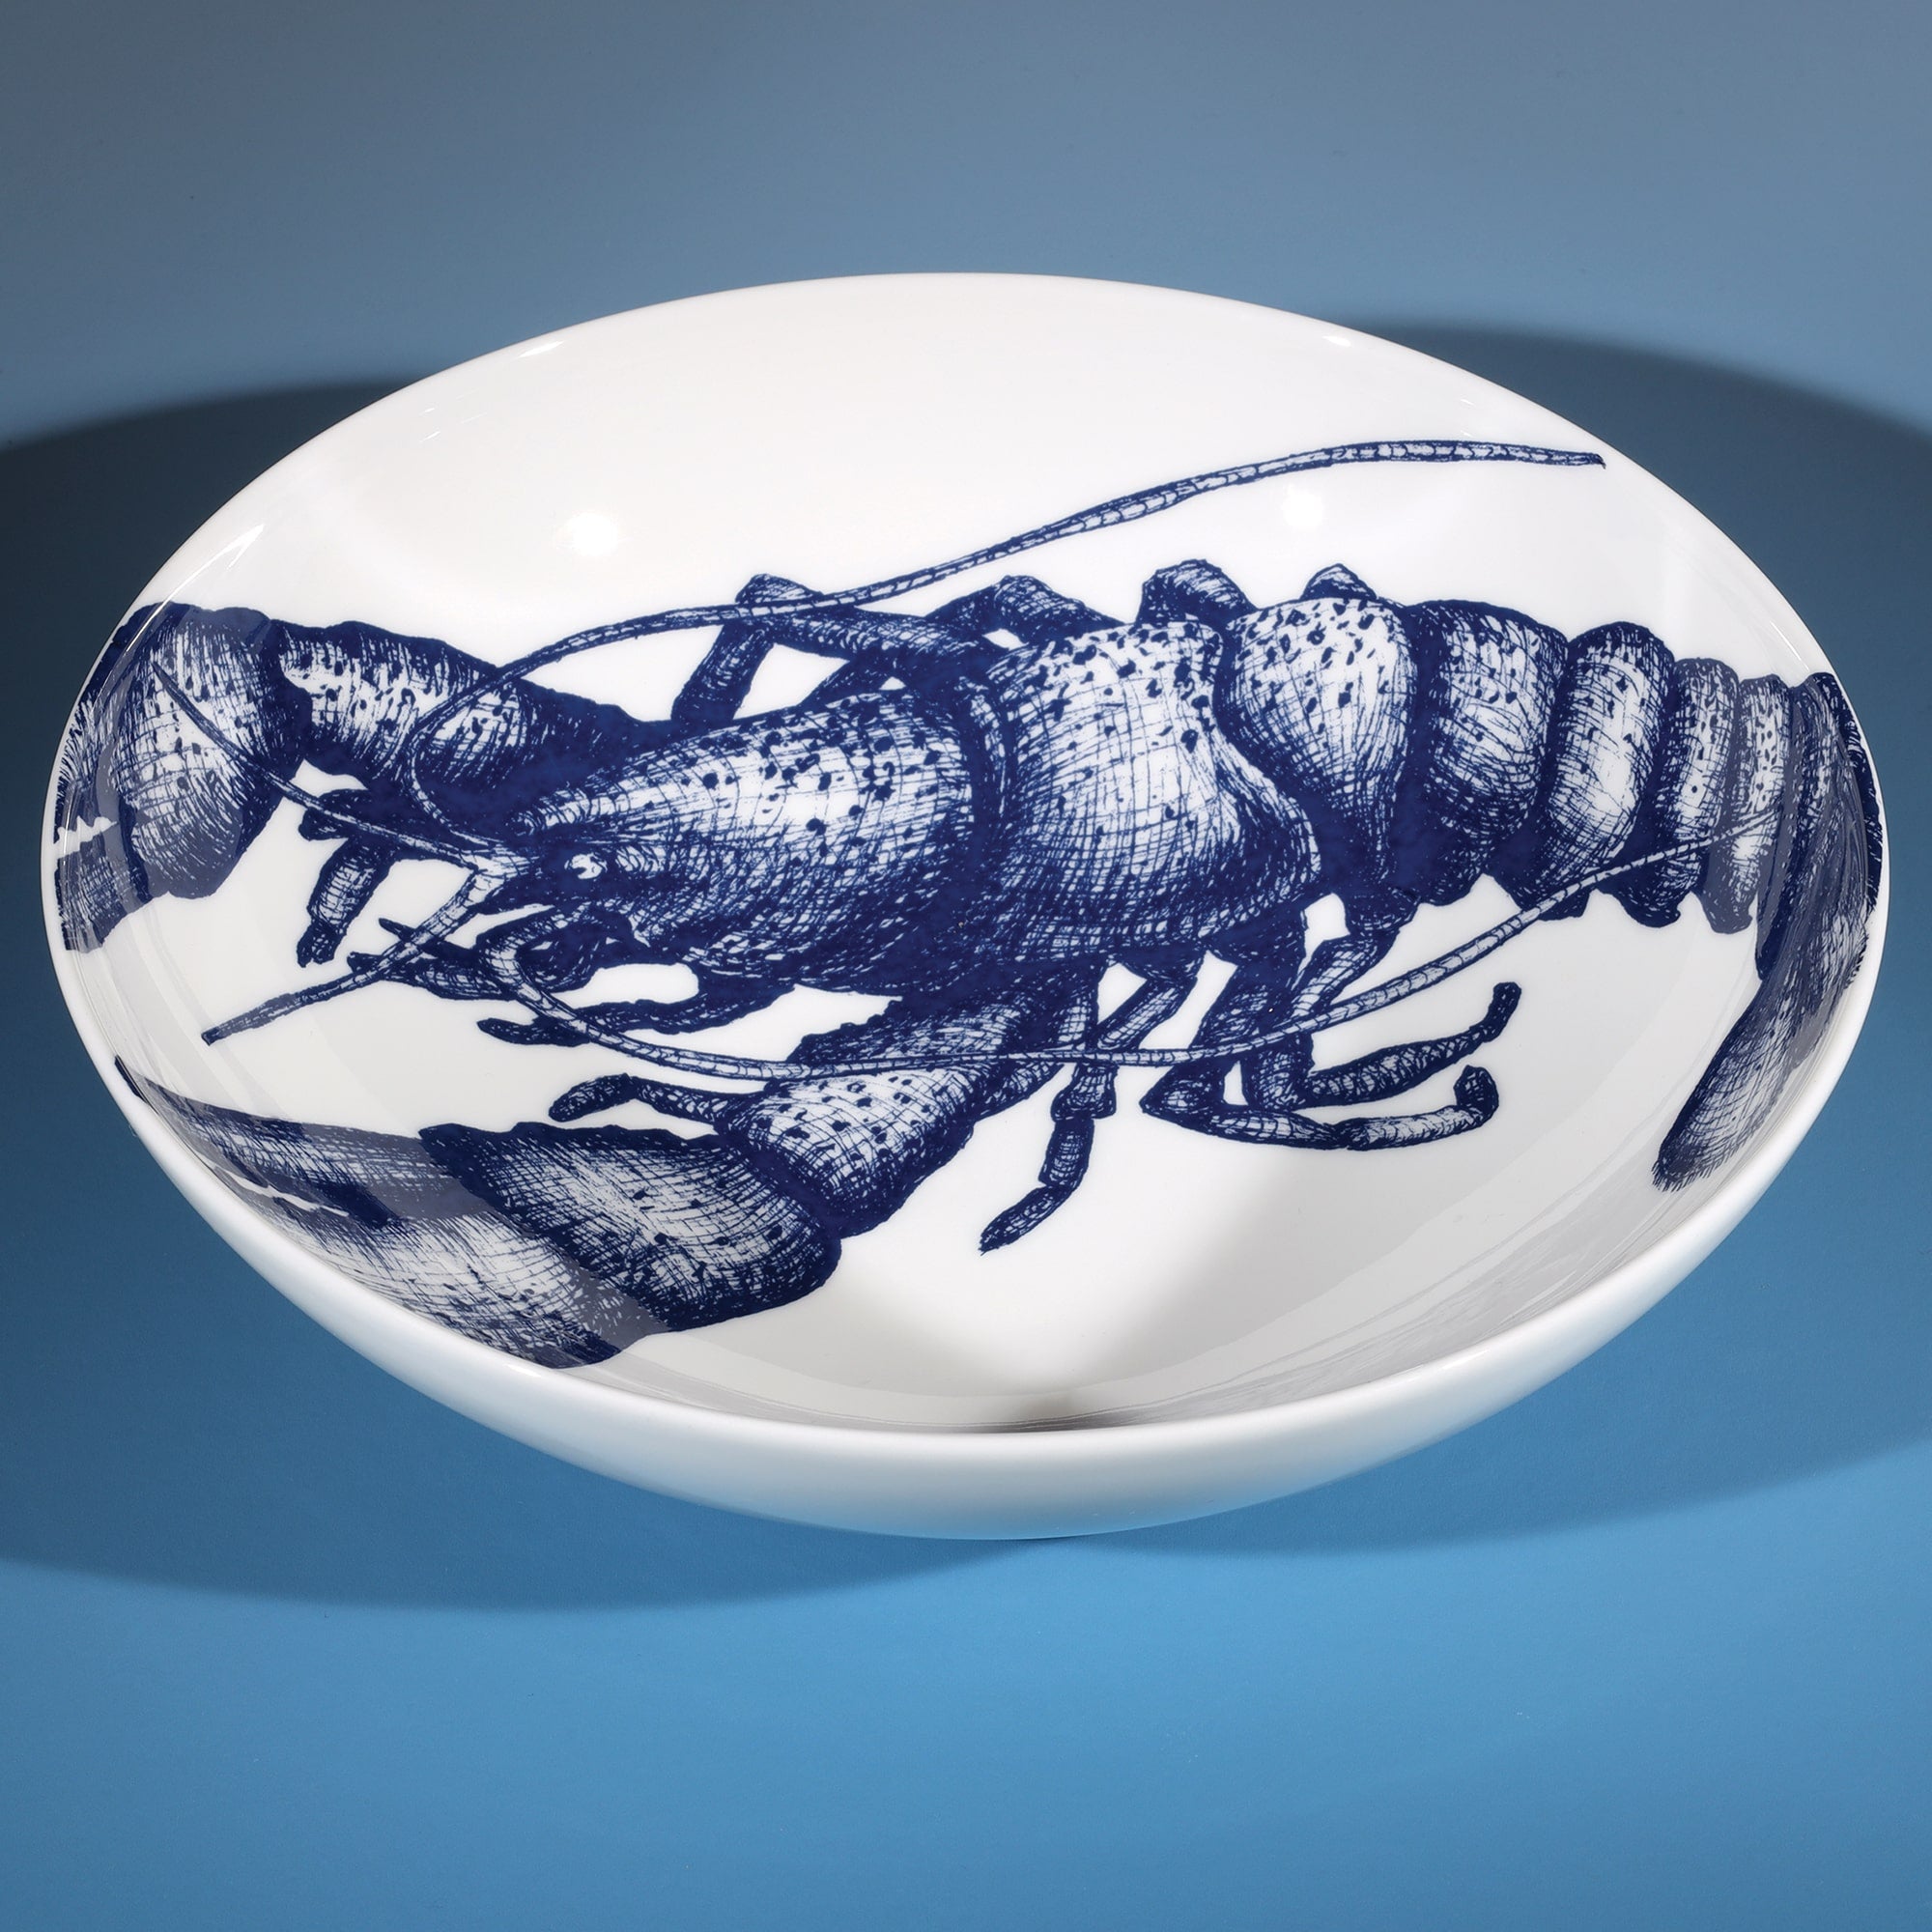 Pasta bowl in Bone China in our Classic range in Navy and white in the Lobster design